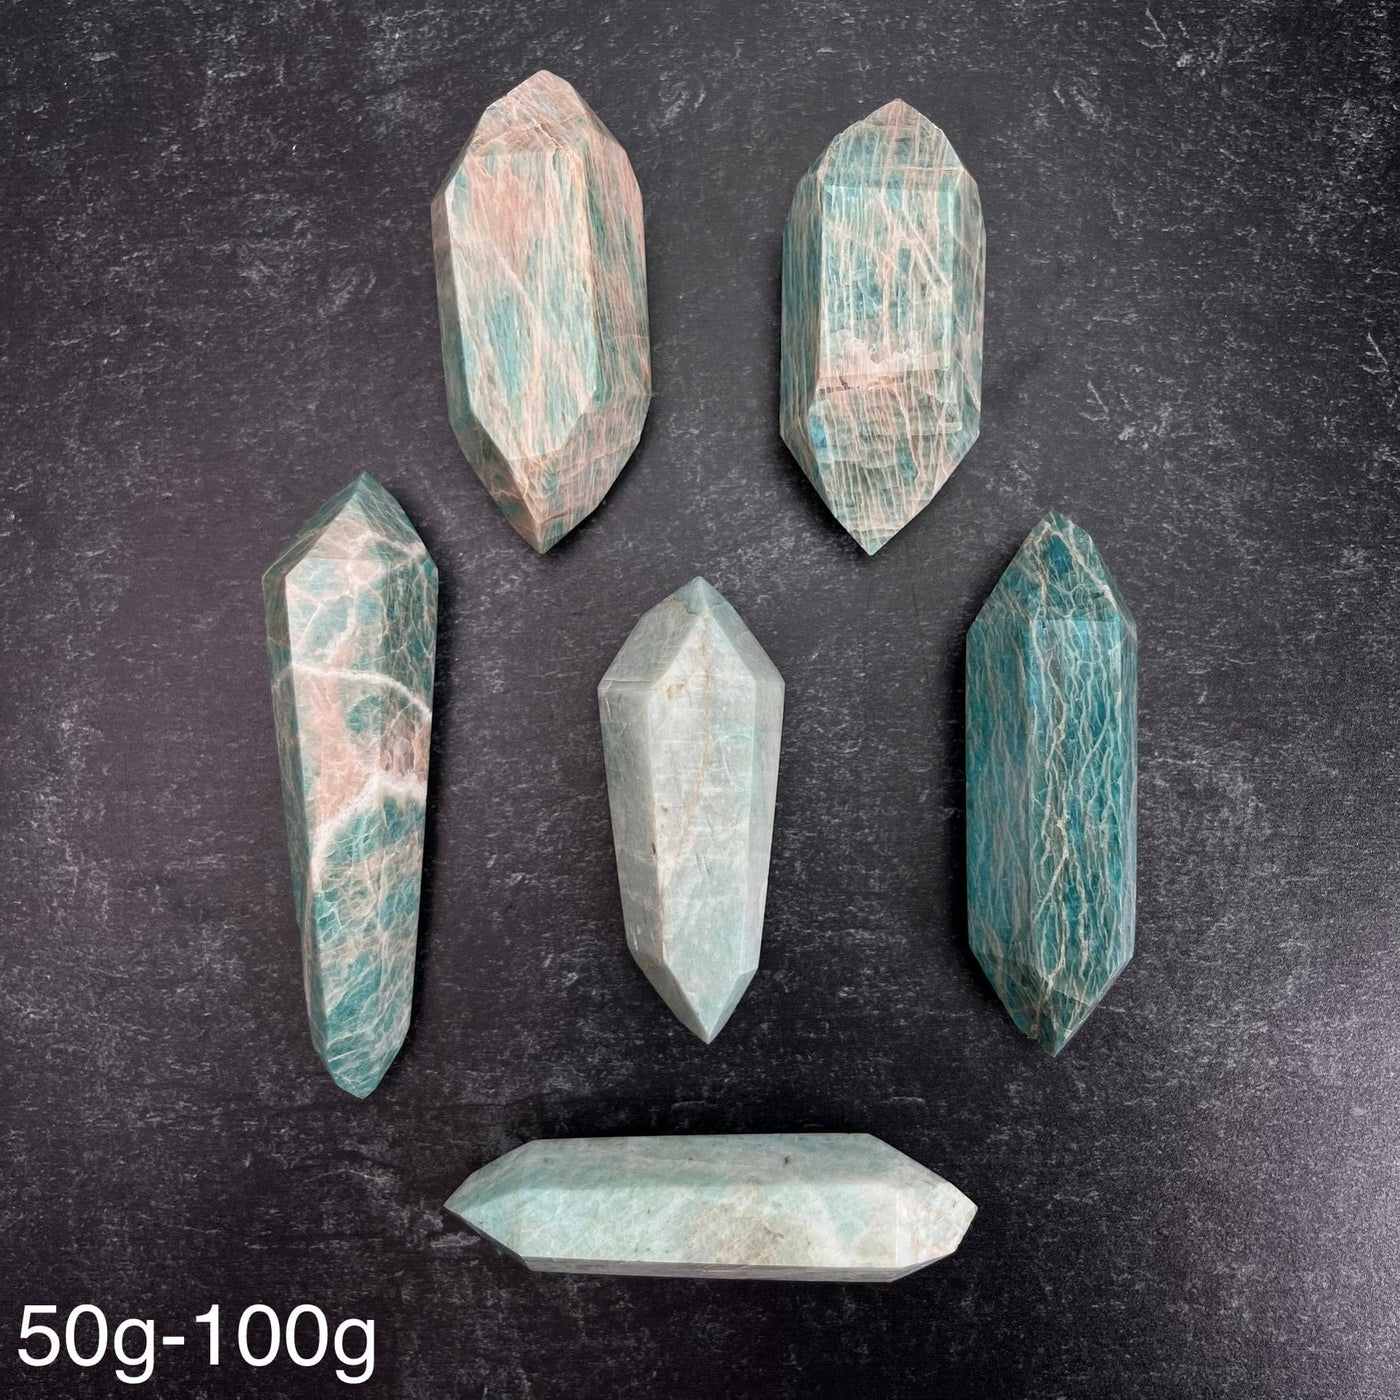 Six different variations of the Amazonite Polished Double Terminated Points, in the weight range of 50g-100g, laid out on a black surface.